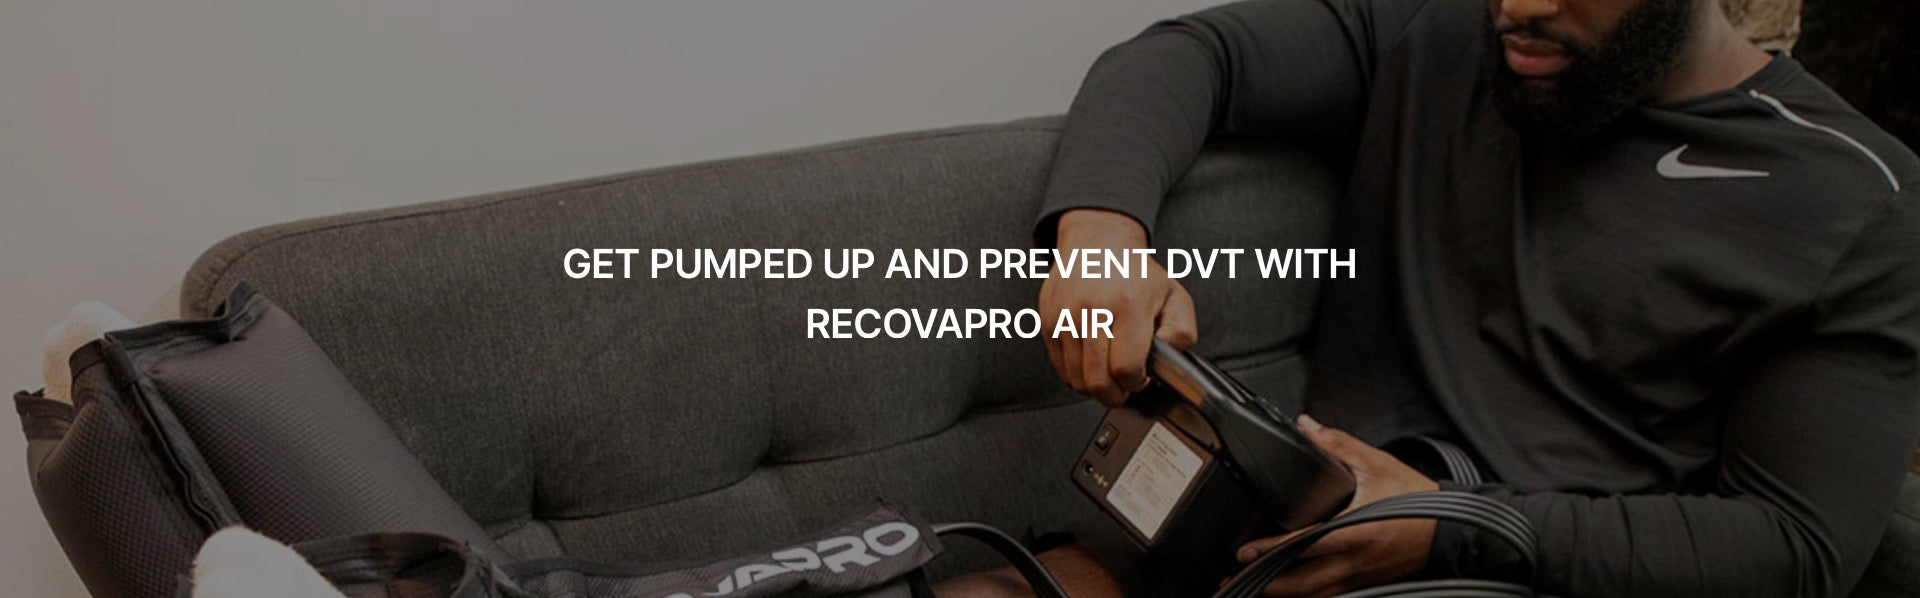 GET PUMPED UP AND PREVENT DVT WITH RECOVAPRO AIR